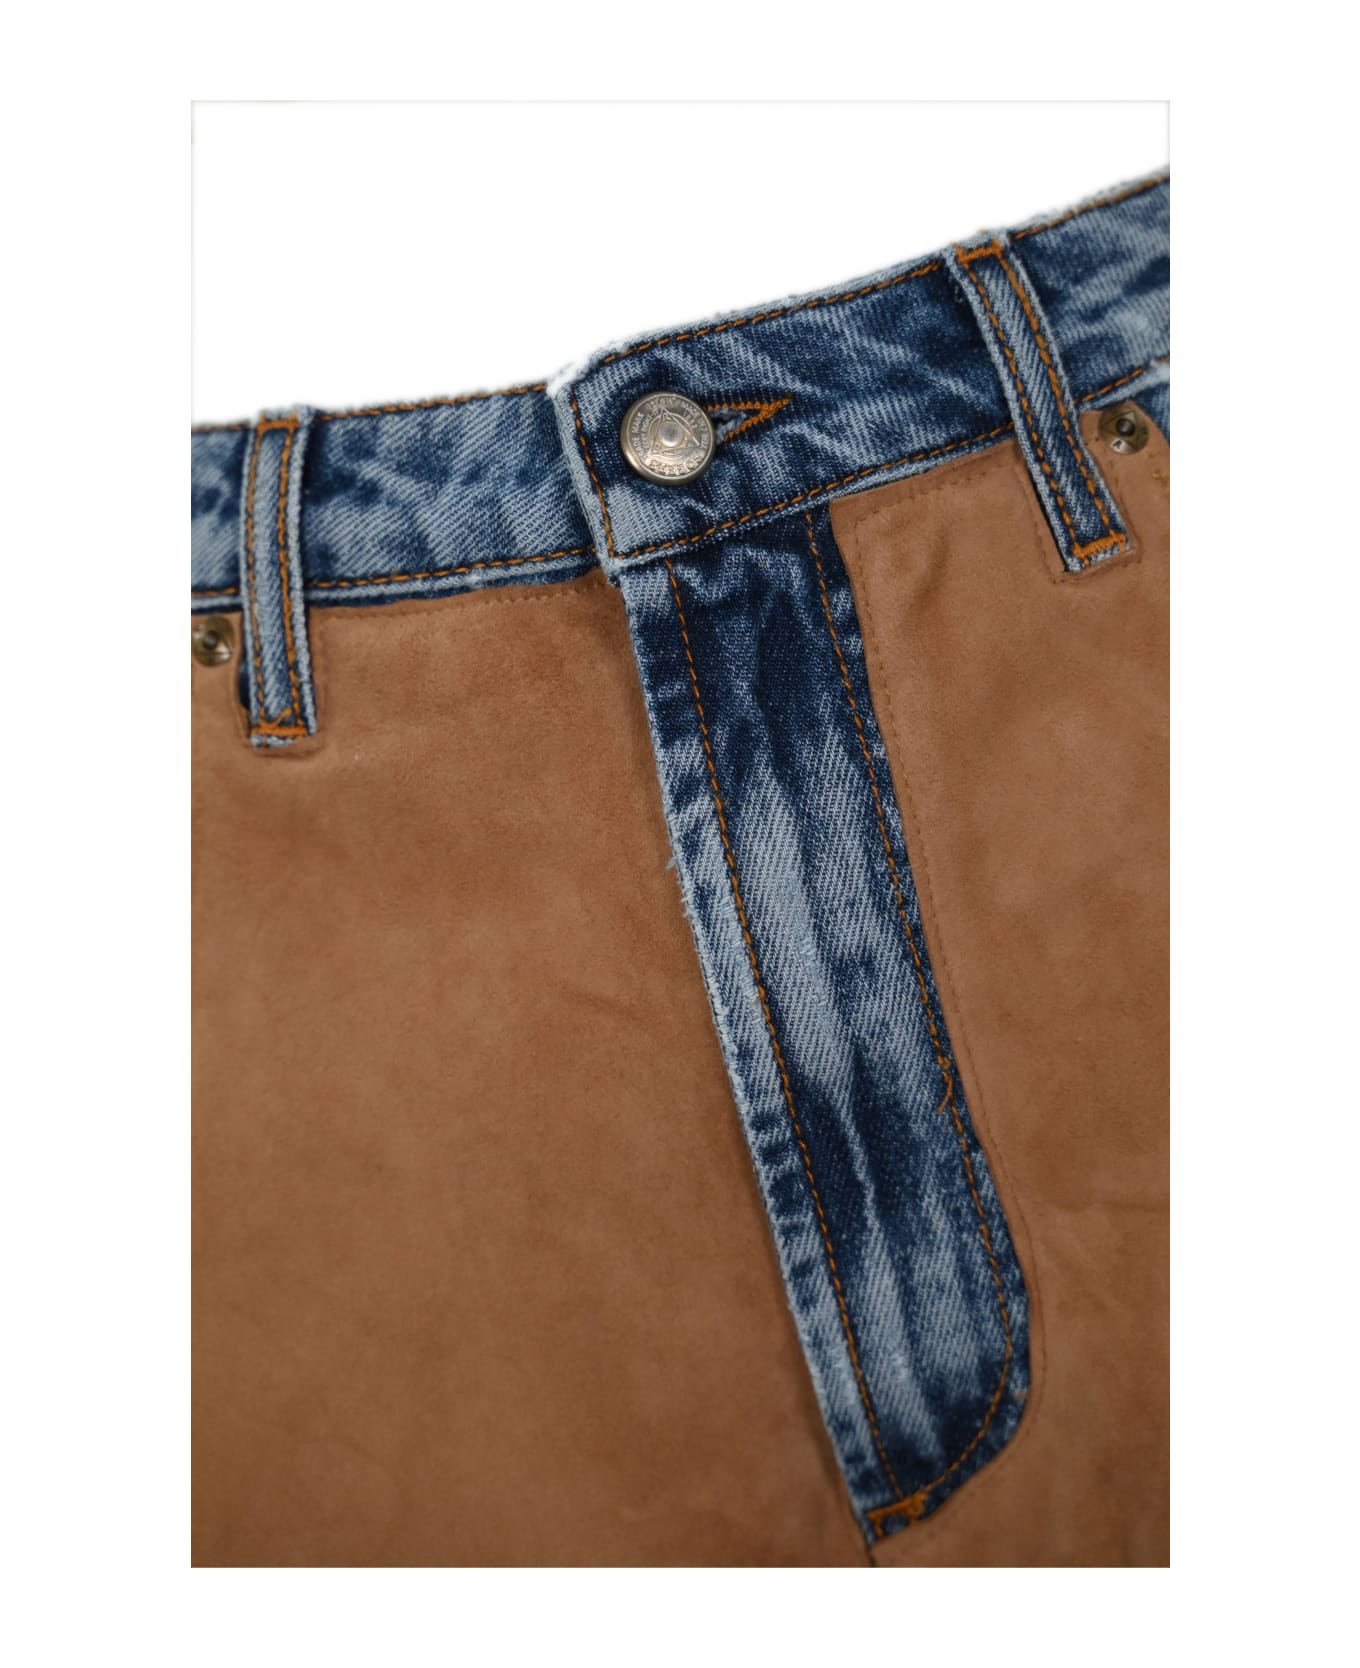 Roy Rogers Denim And Suede Shorts - Denim